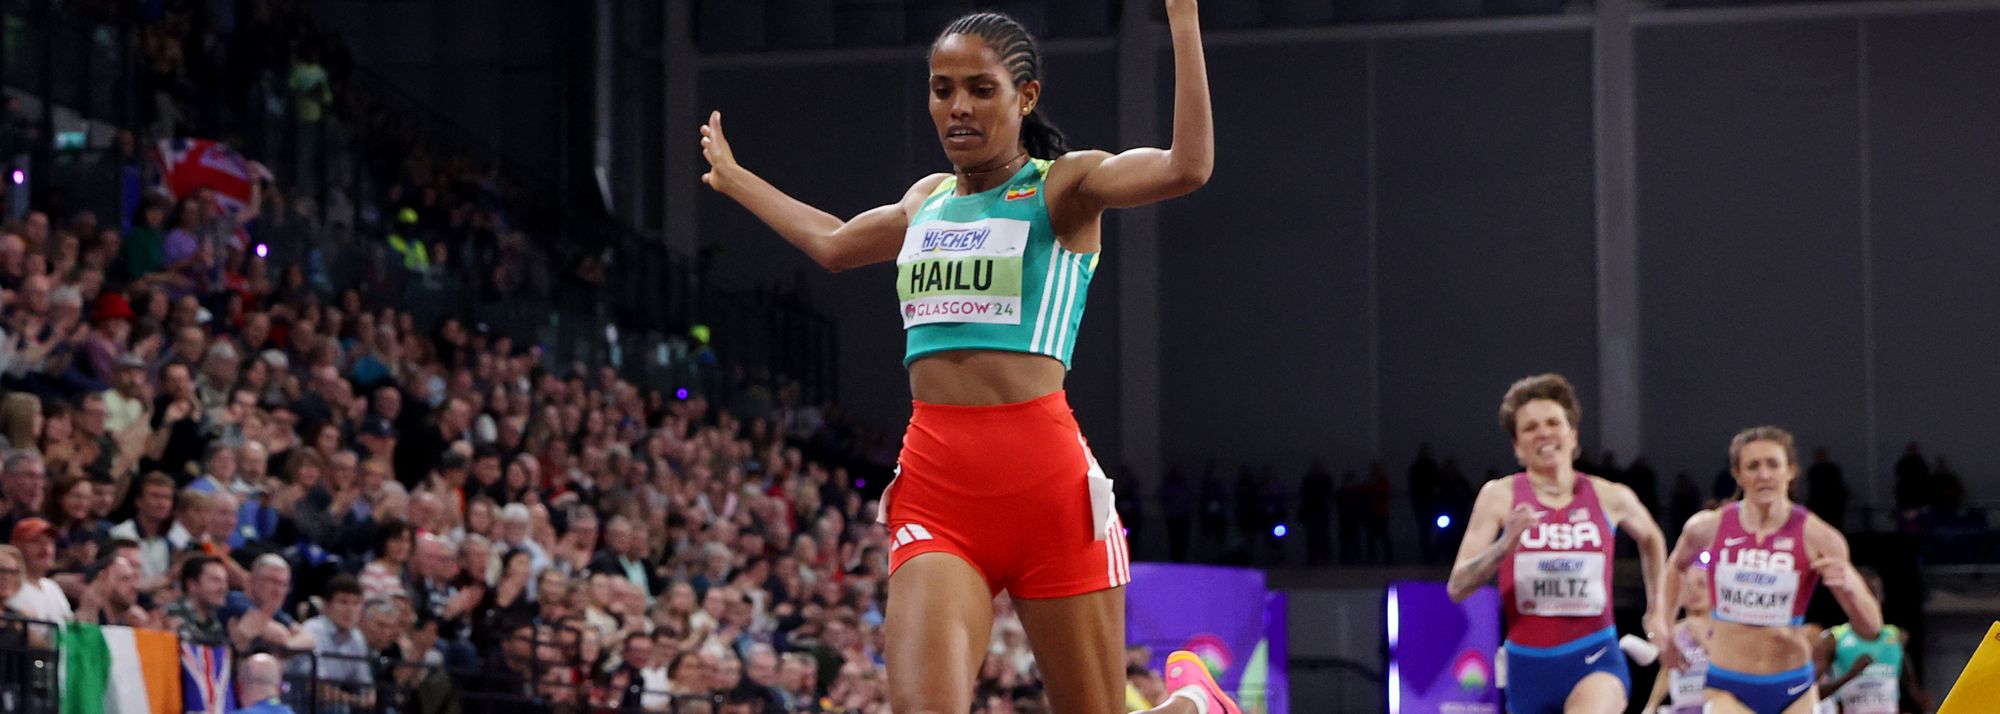 Freweyni Hailu produced an expected victory in the women’s 1500m, the closing event of the championships